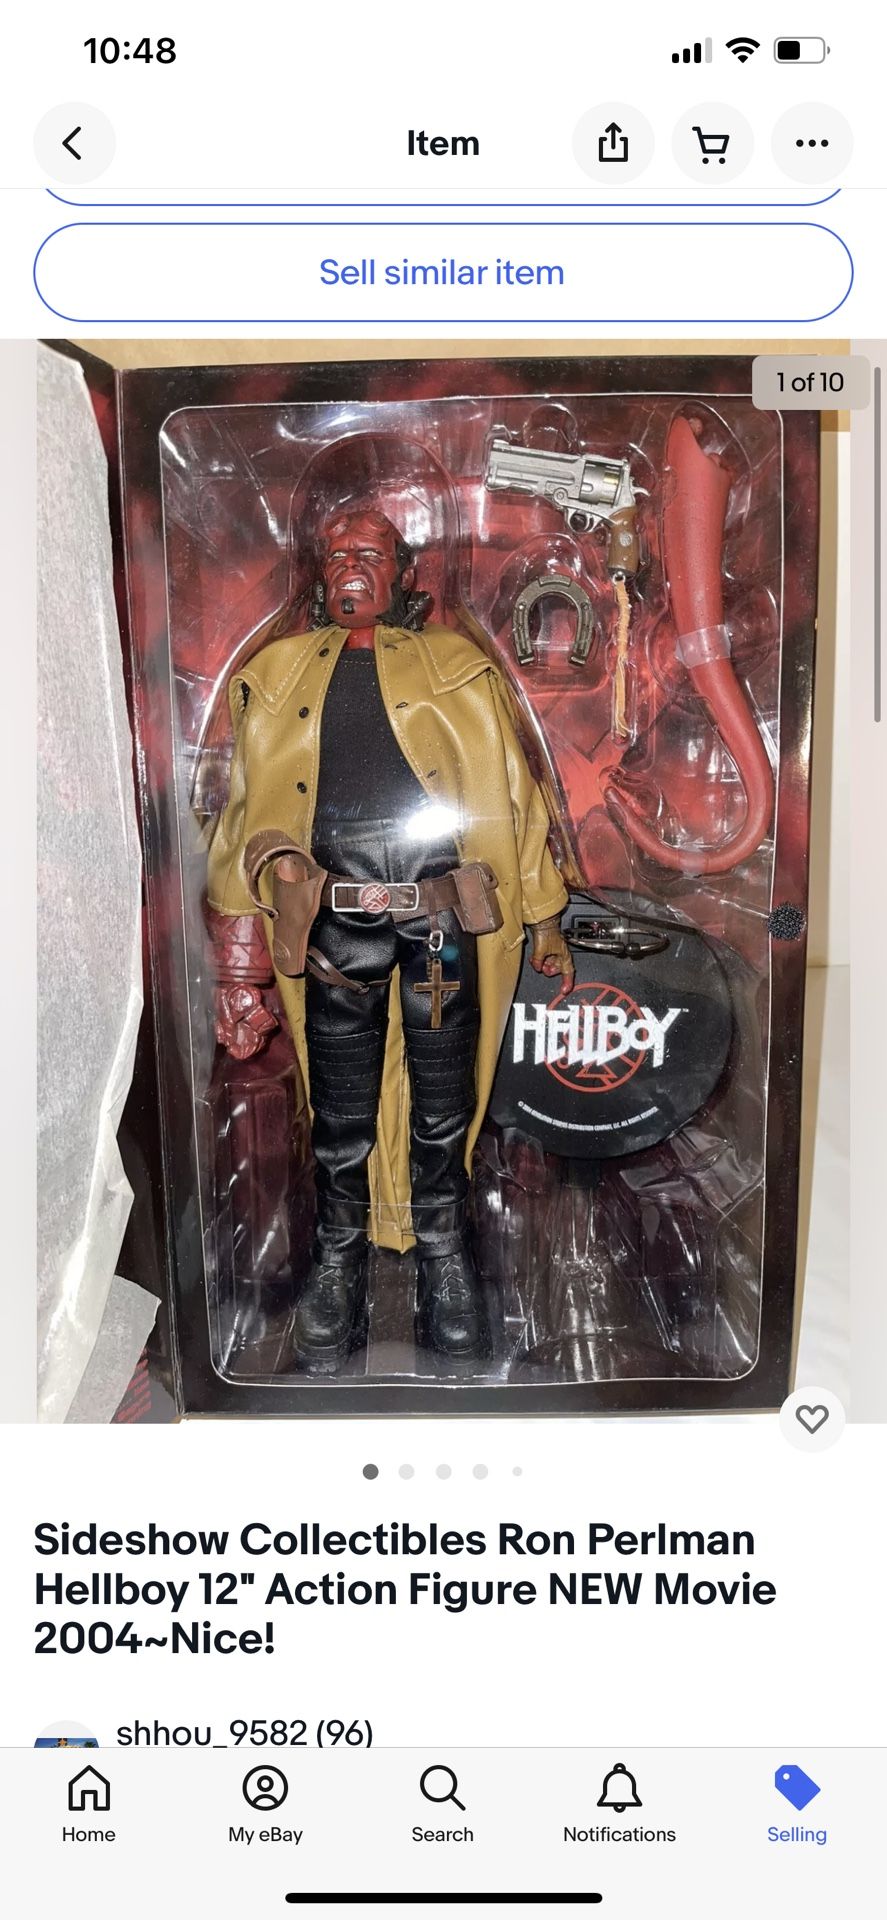 Sideshow Collectibles Ron Perlman Hellboy 12" Action Figure NEW Movie 2004~Nice!